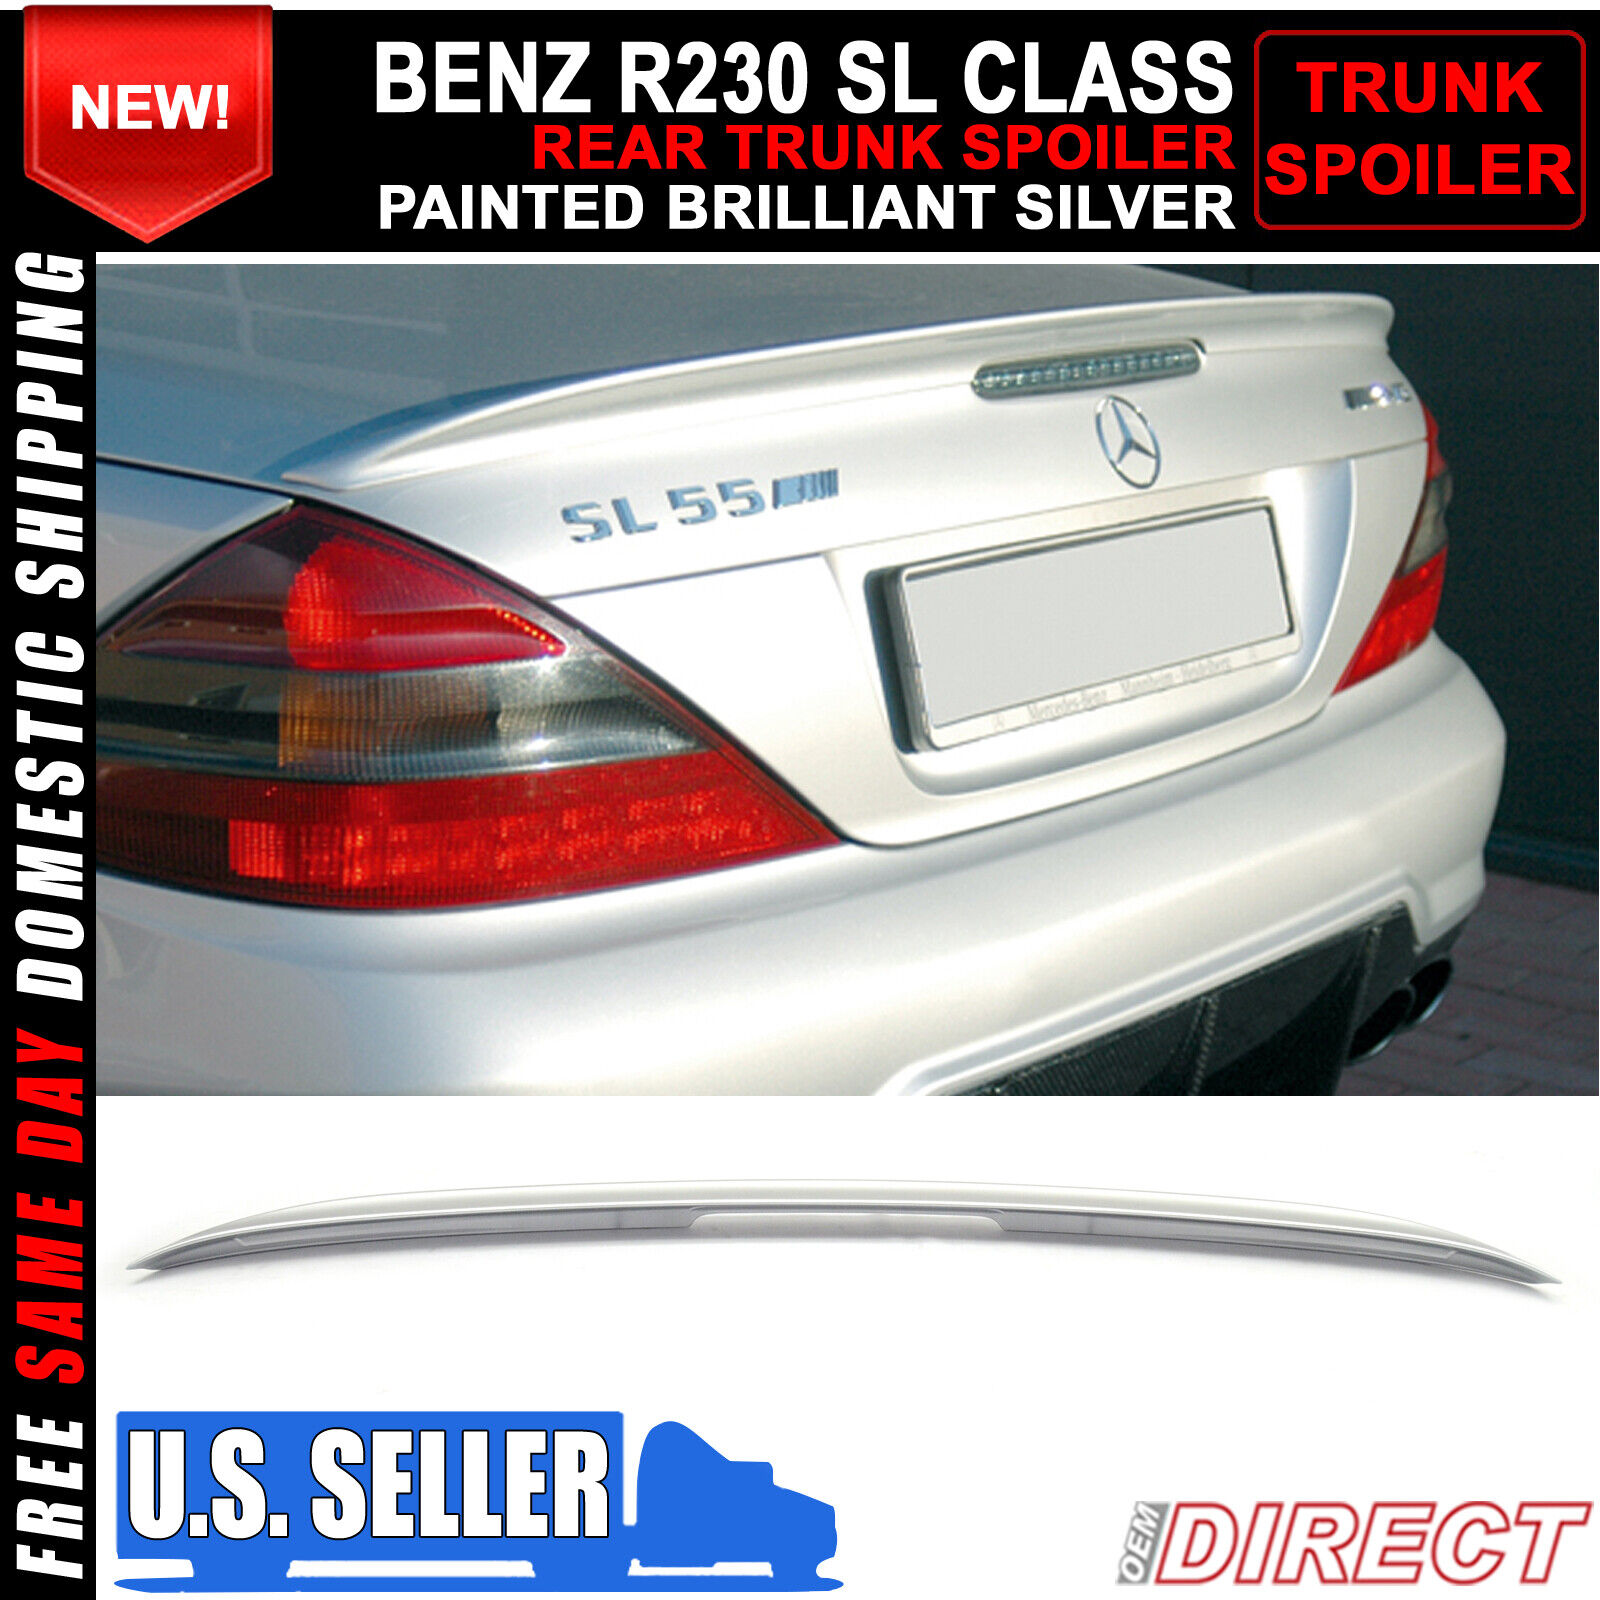 03-11 Benz Sl-Class R230 AMG Style #744 775 Painted ABS Trunk Spoiler